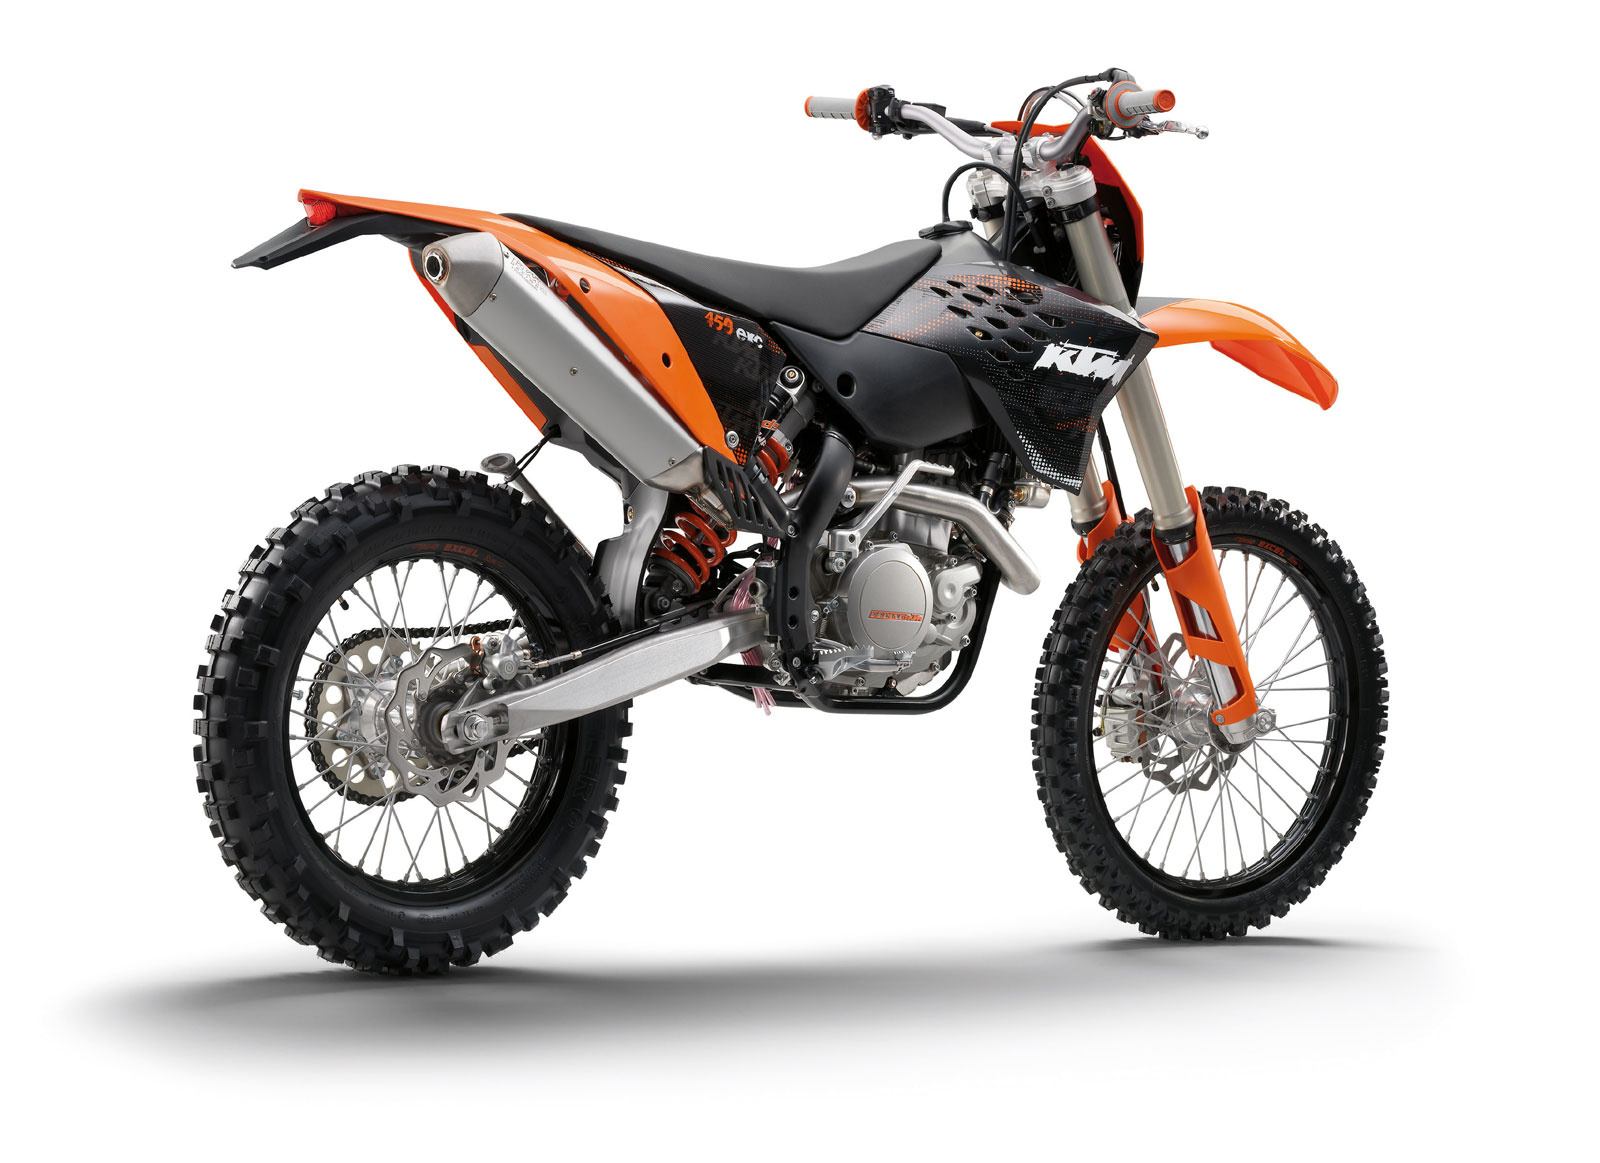 http://www.totalmotorcycle.com/photos/2009models/2009-KTM-450EXCc.jpg